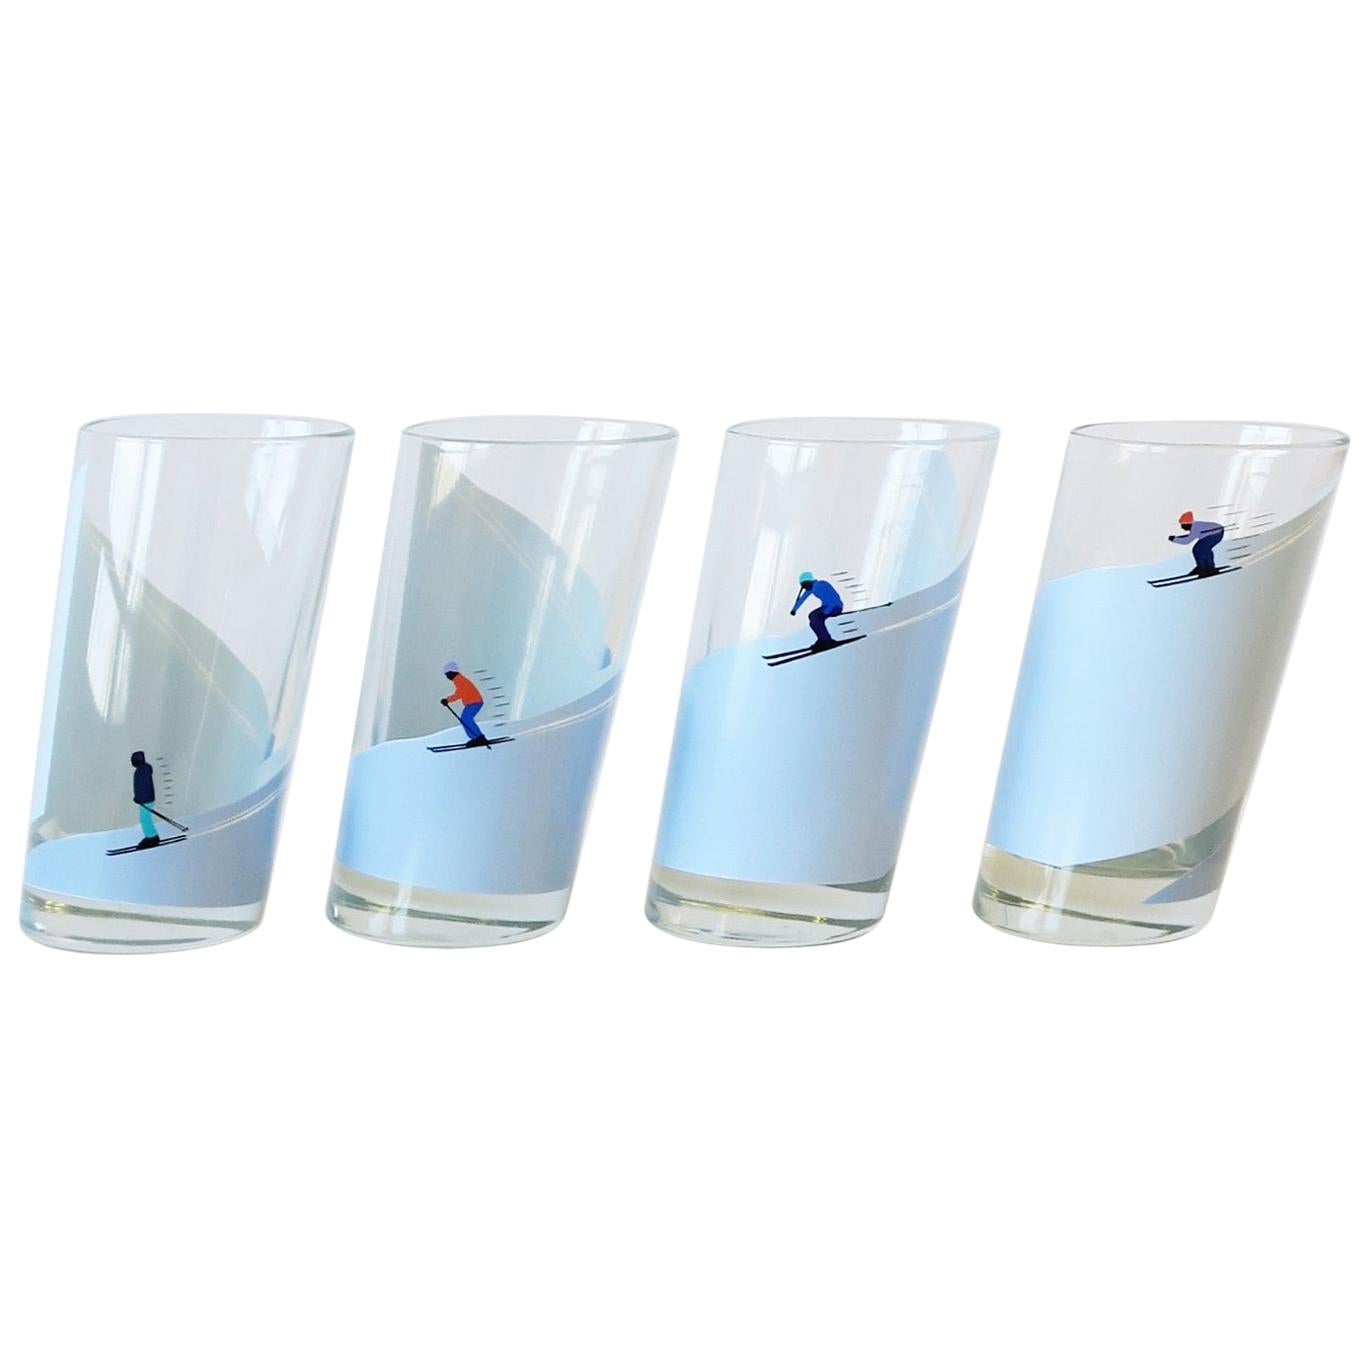 https://a.1stdibscdn.com/italian-highball-cocktail-glasses-with-alpine-skiers-set-of-4-for-sale/1121189/f_232747721619456744930/23274772_master.jpg